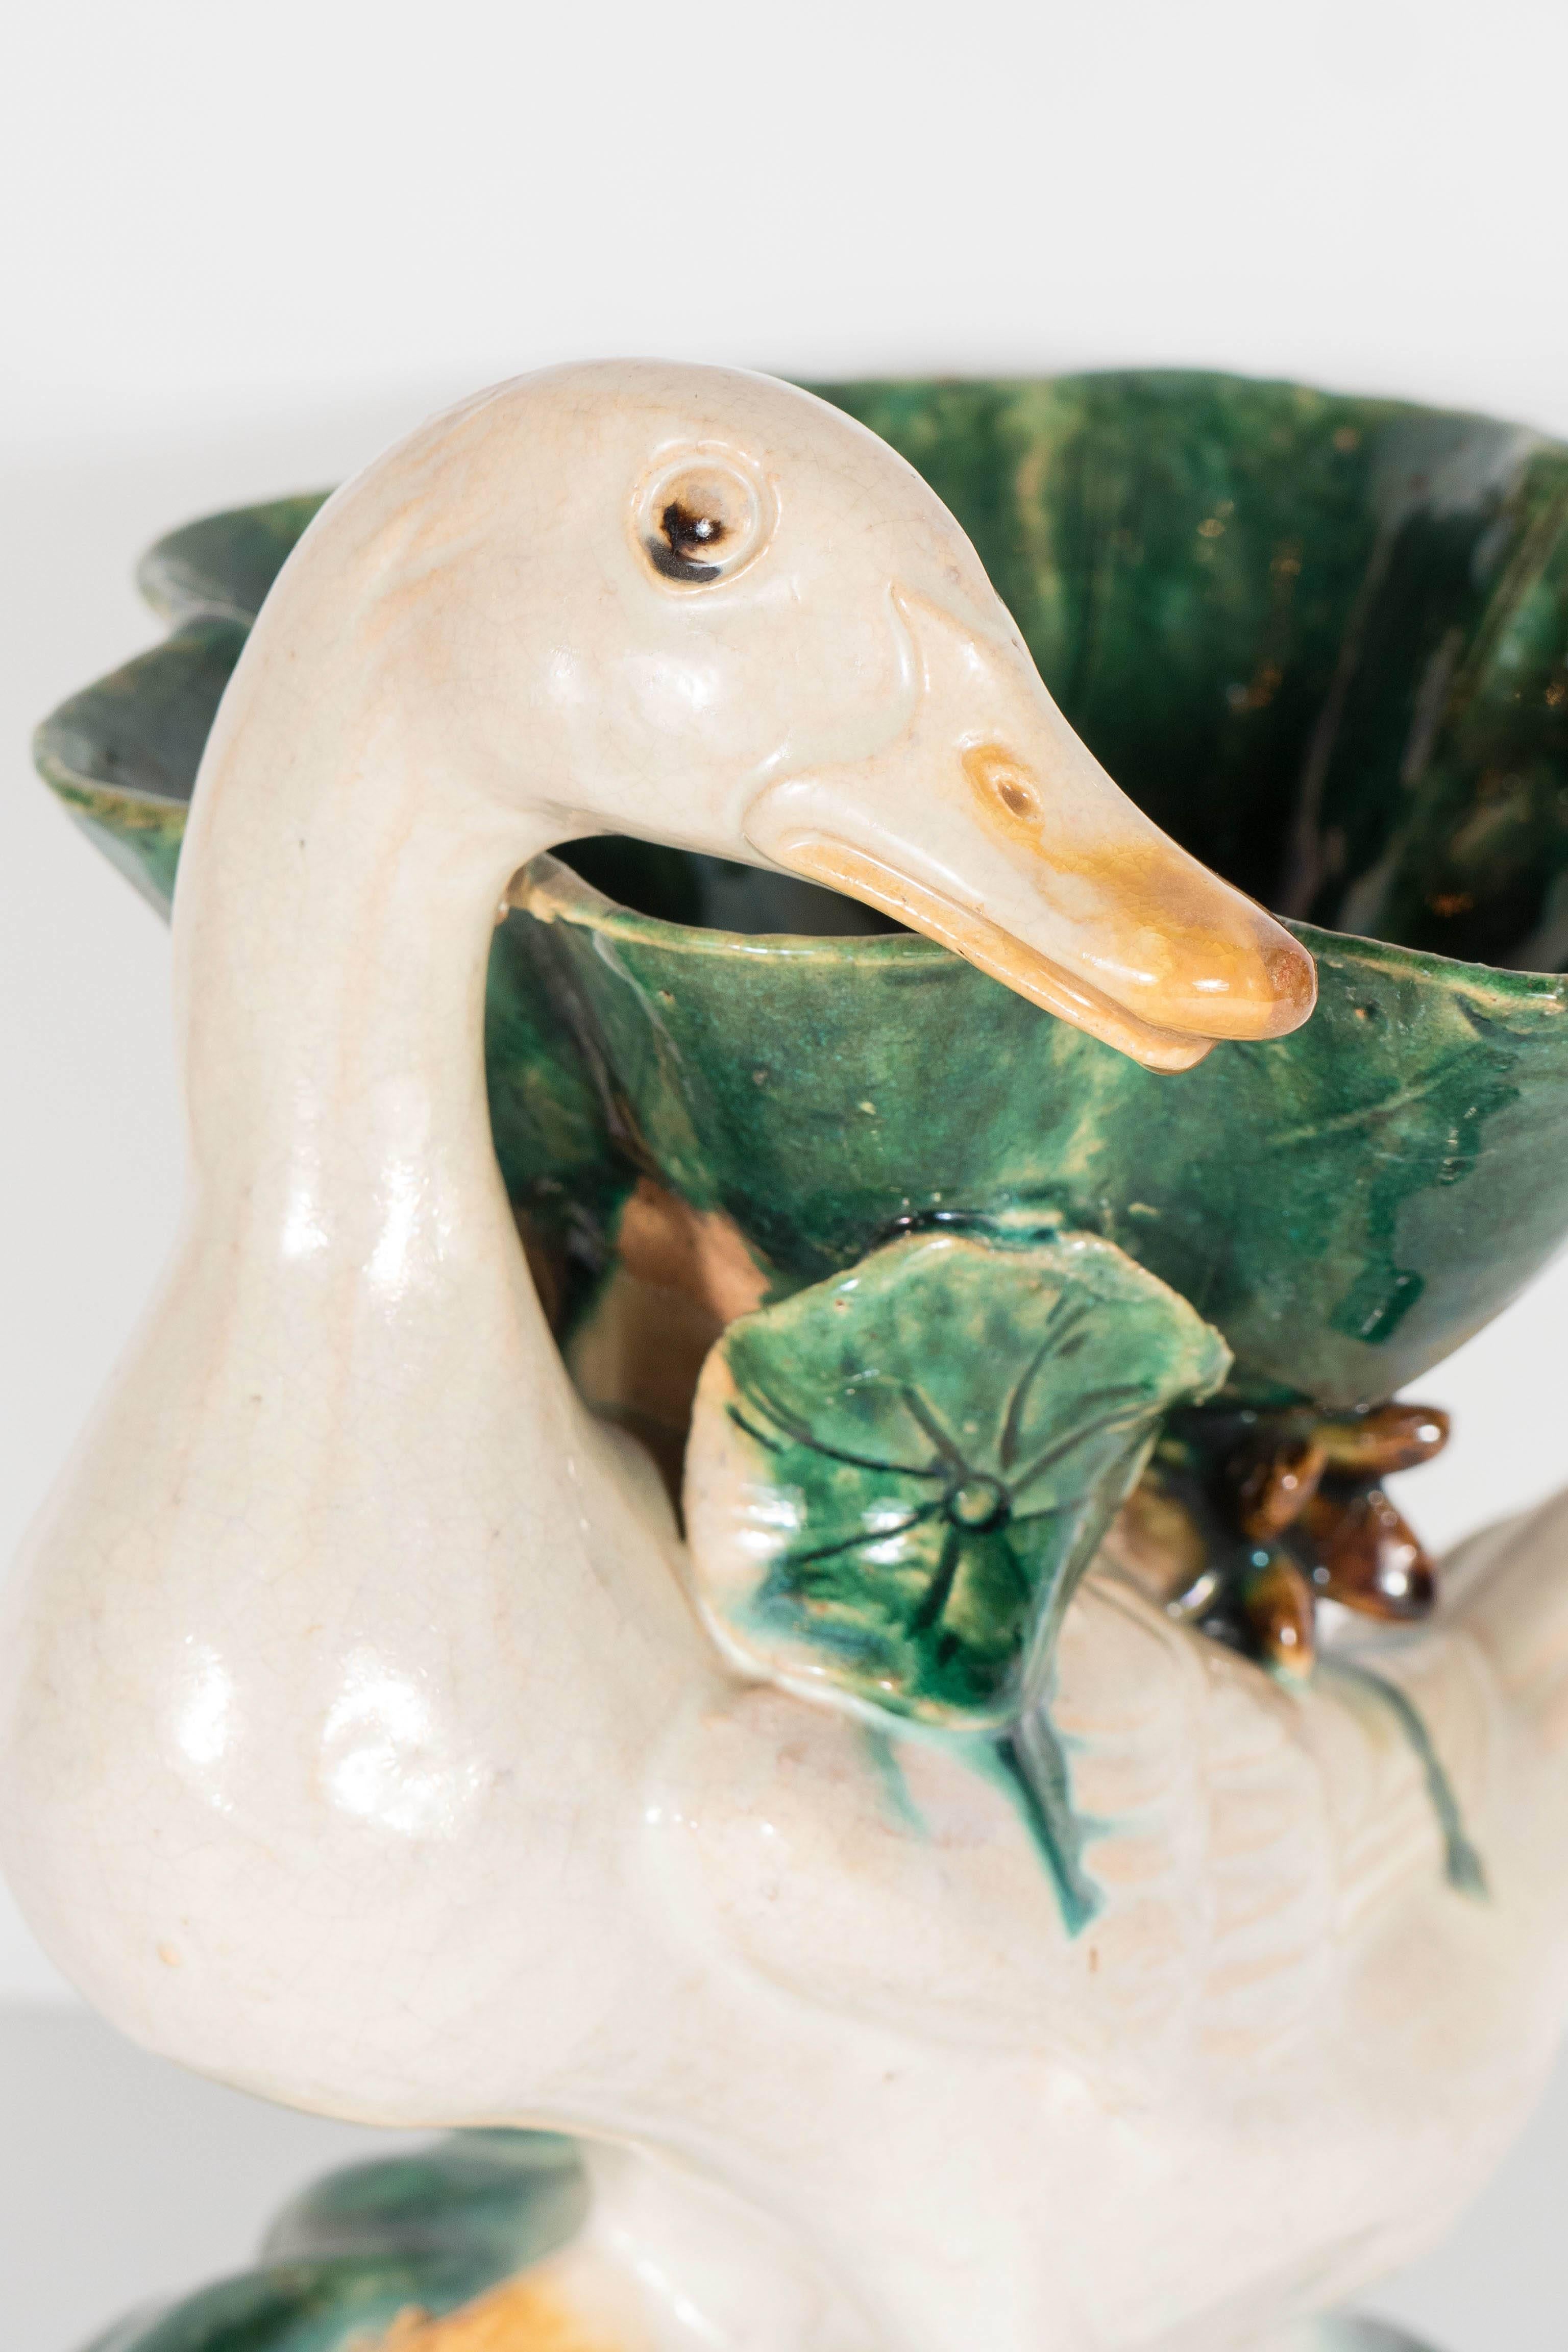 Early 19th century duck form pottery brush washers. They have been hand painted in hues of emerald, taupe, tobacco and ochre. These exquisite pieces would be perfect as decorative objects and could also be used for a variety of functional purposes,